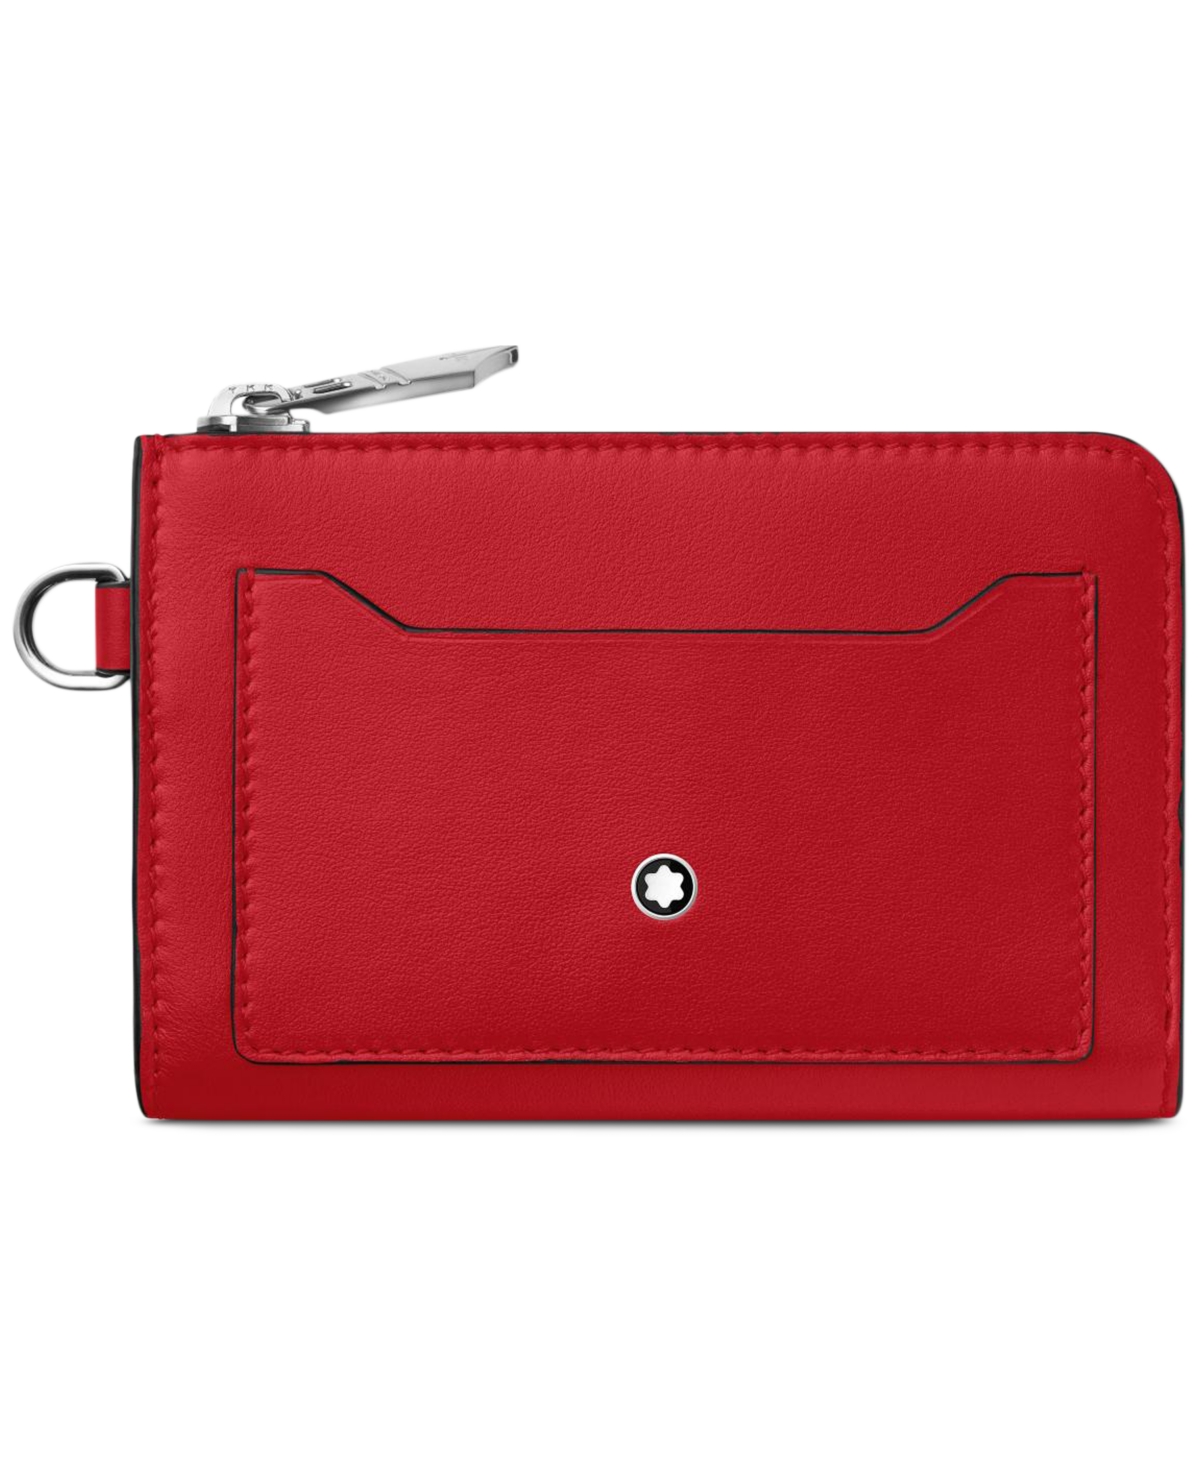 Montblanc Meisterstuck Key Pouch In Coral